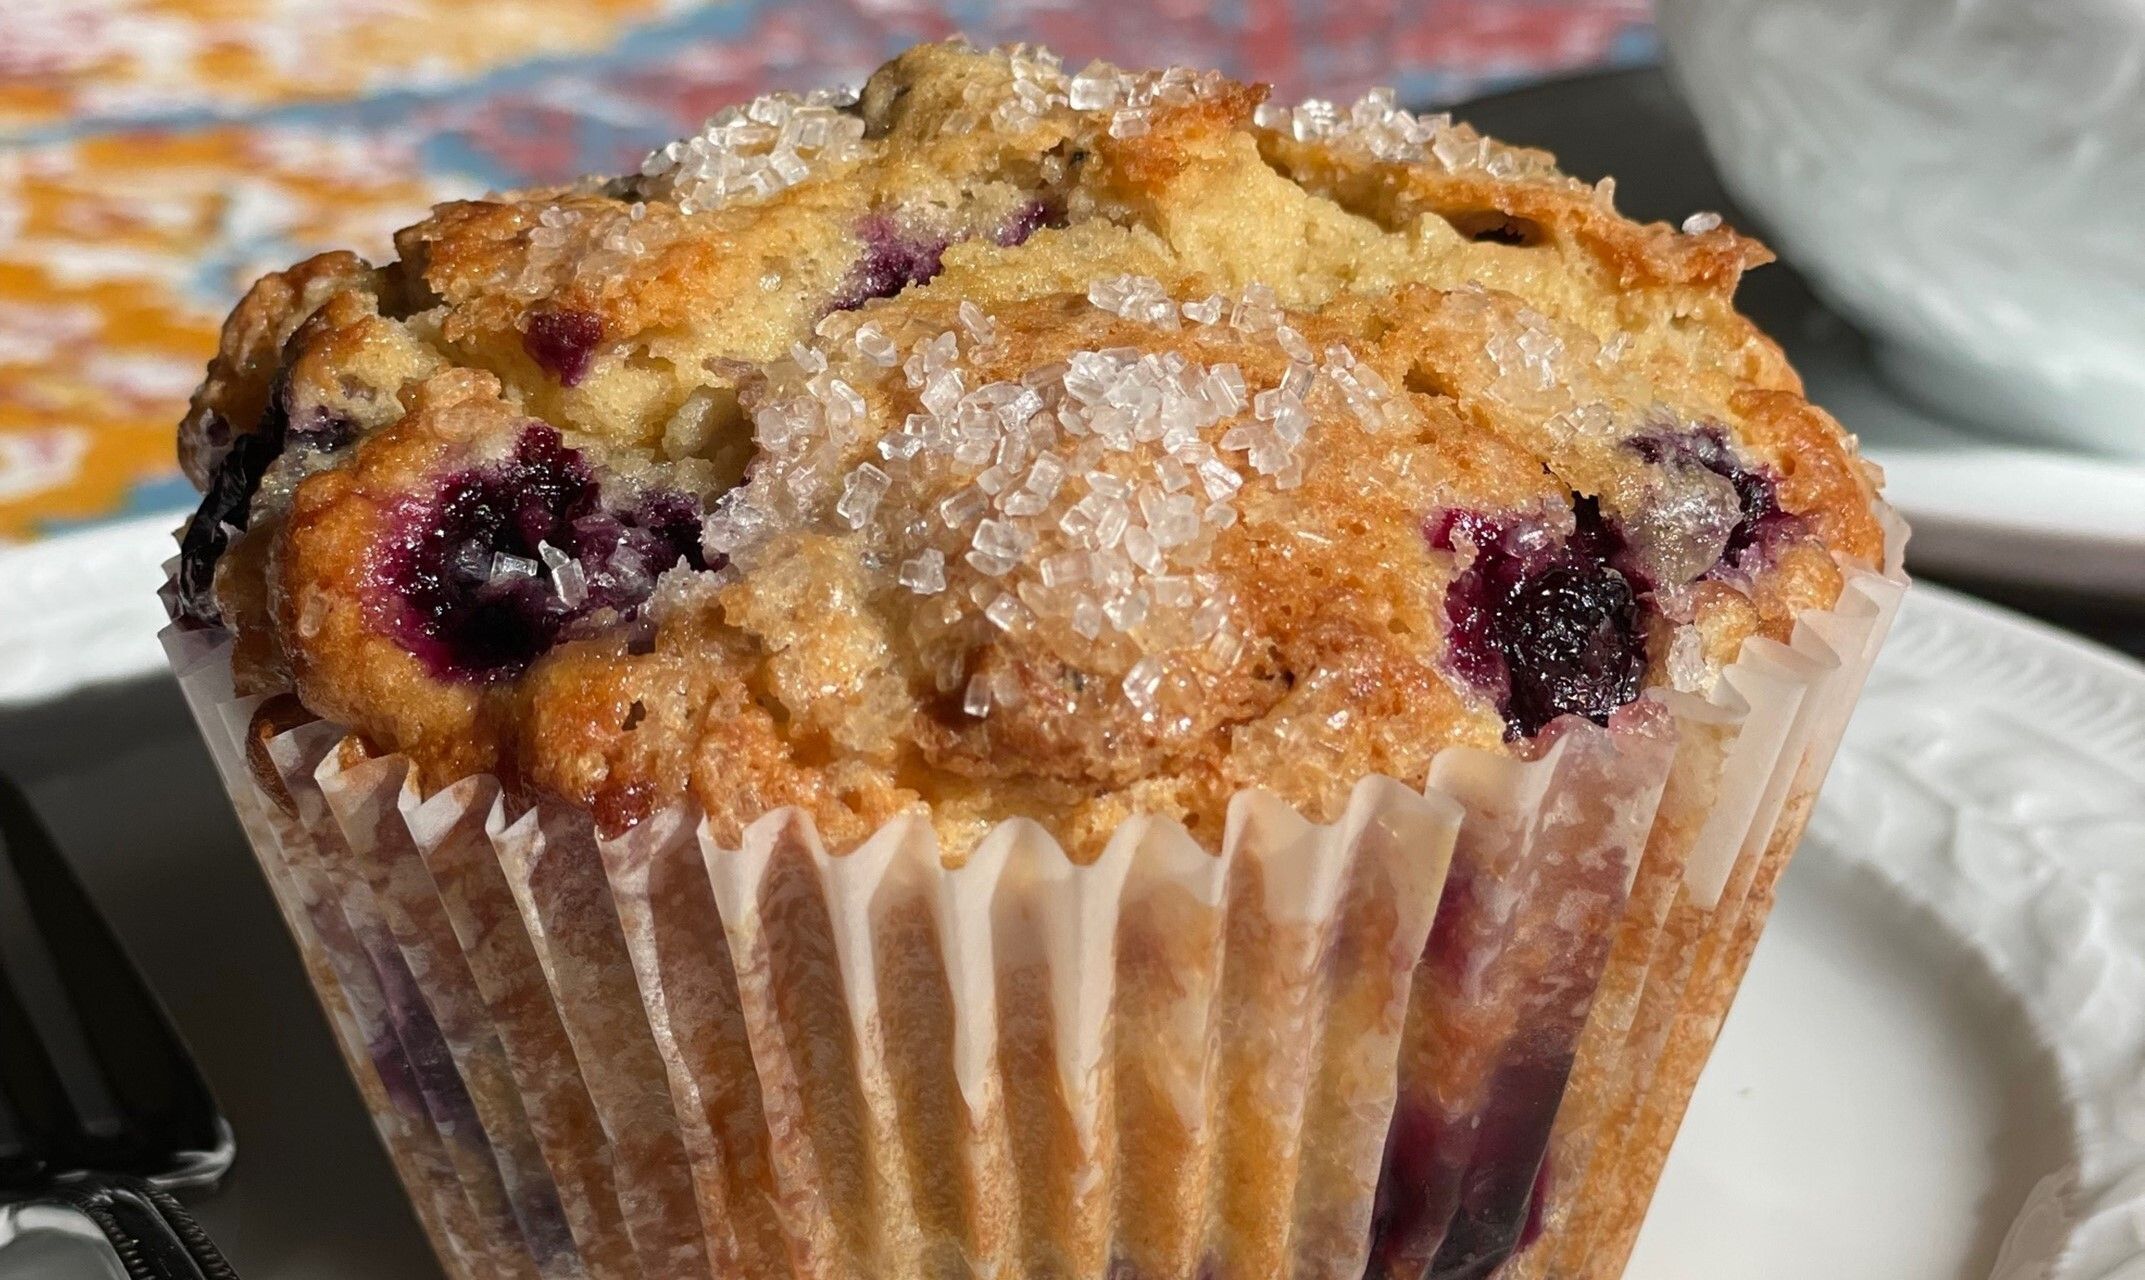 Teen's Favorite Blueberry Muffins from Our Community Table